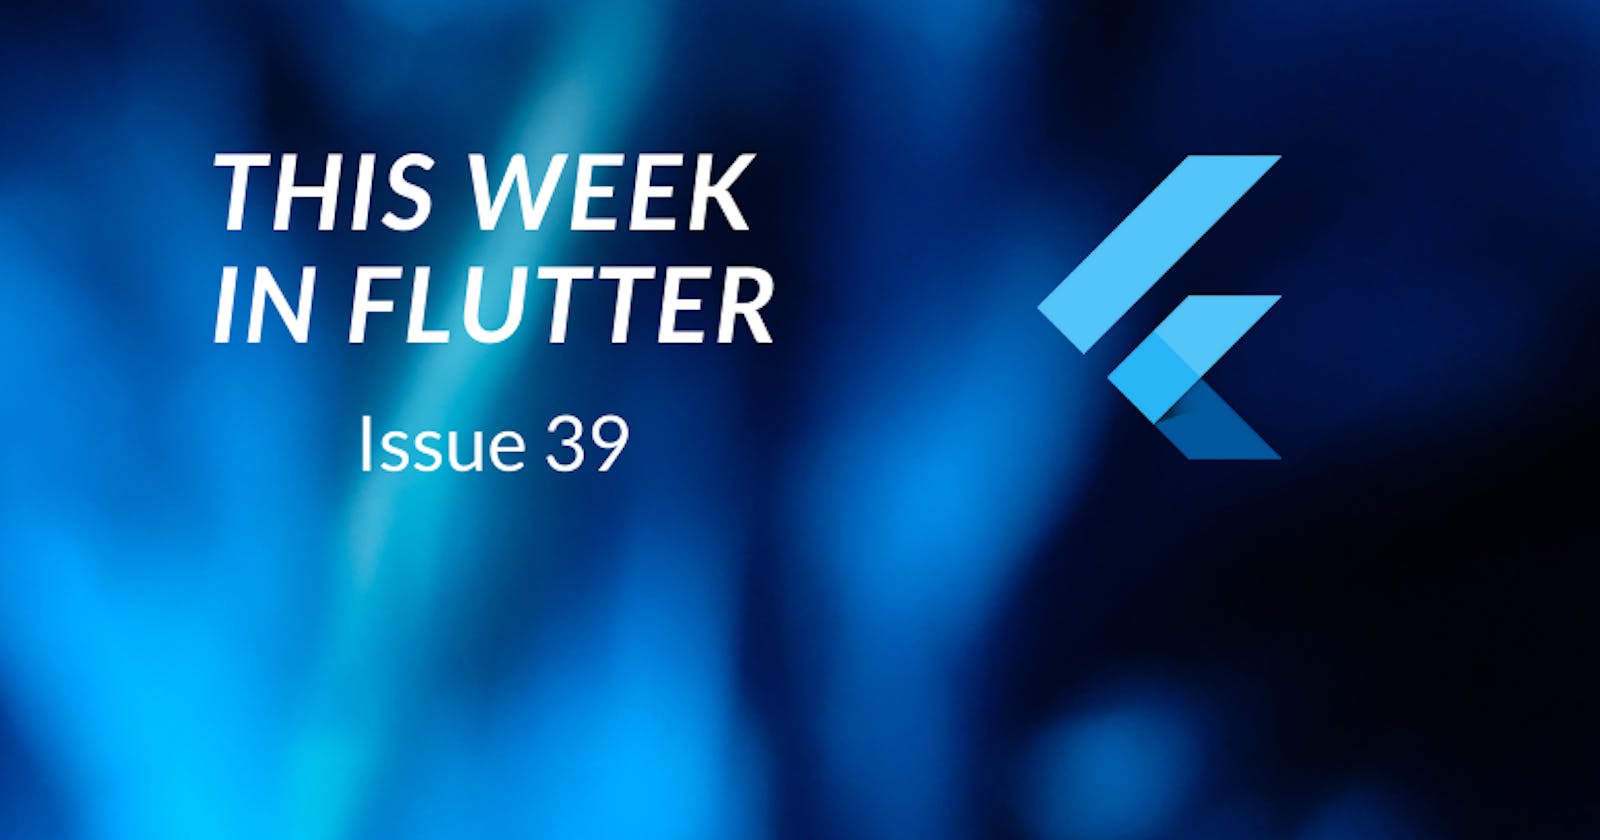 This week in Flutter #39